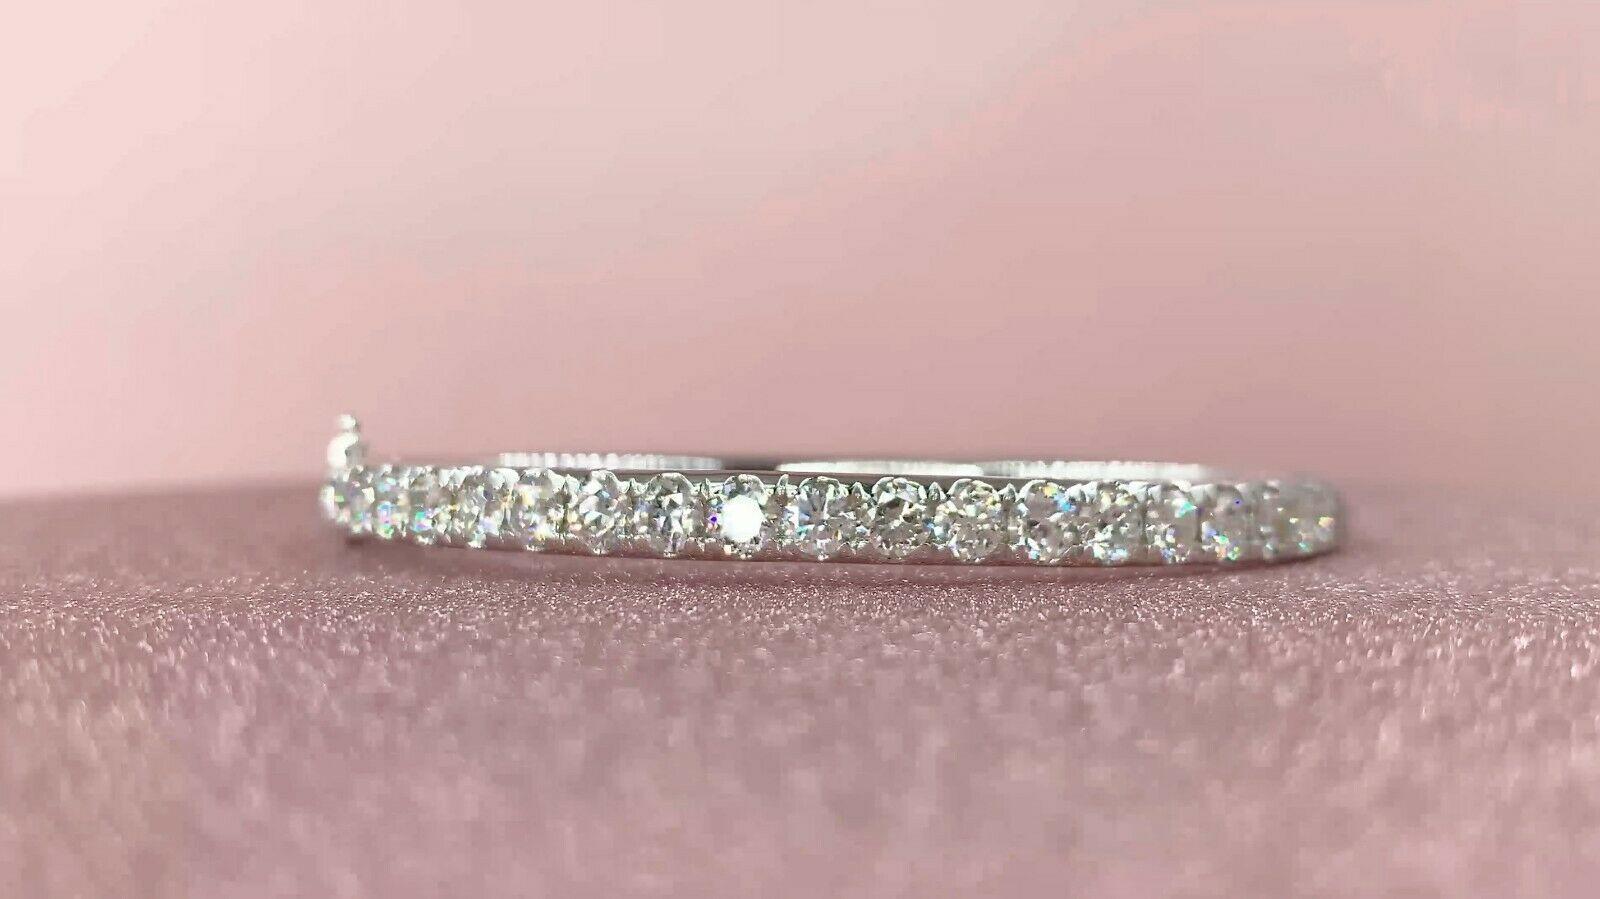 Diamond (3.95 total carat weight) bangle bracelet in 14k white gold. Perfect for an anniversary or valentine's day. The bracelet is designed and handmade locally in Los Angeles by Sage Designs L.A. using earth-mined and conflict free diamonds. 6.5